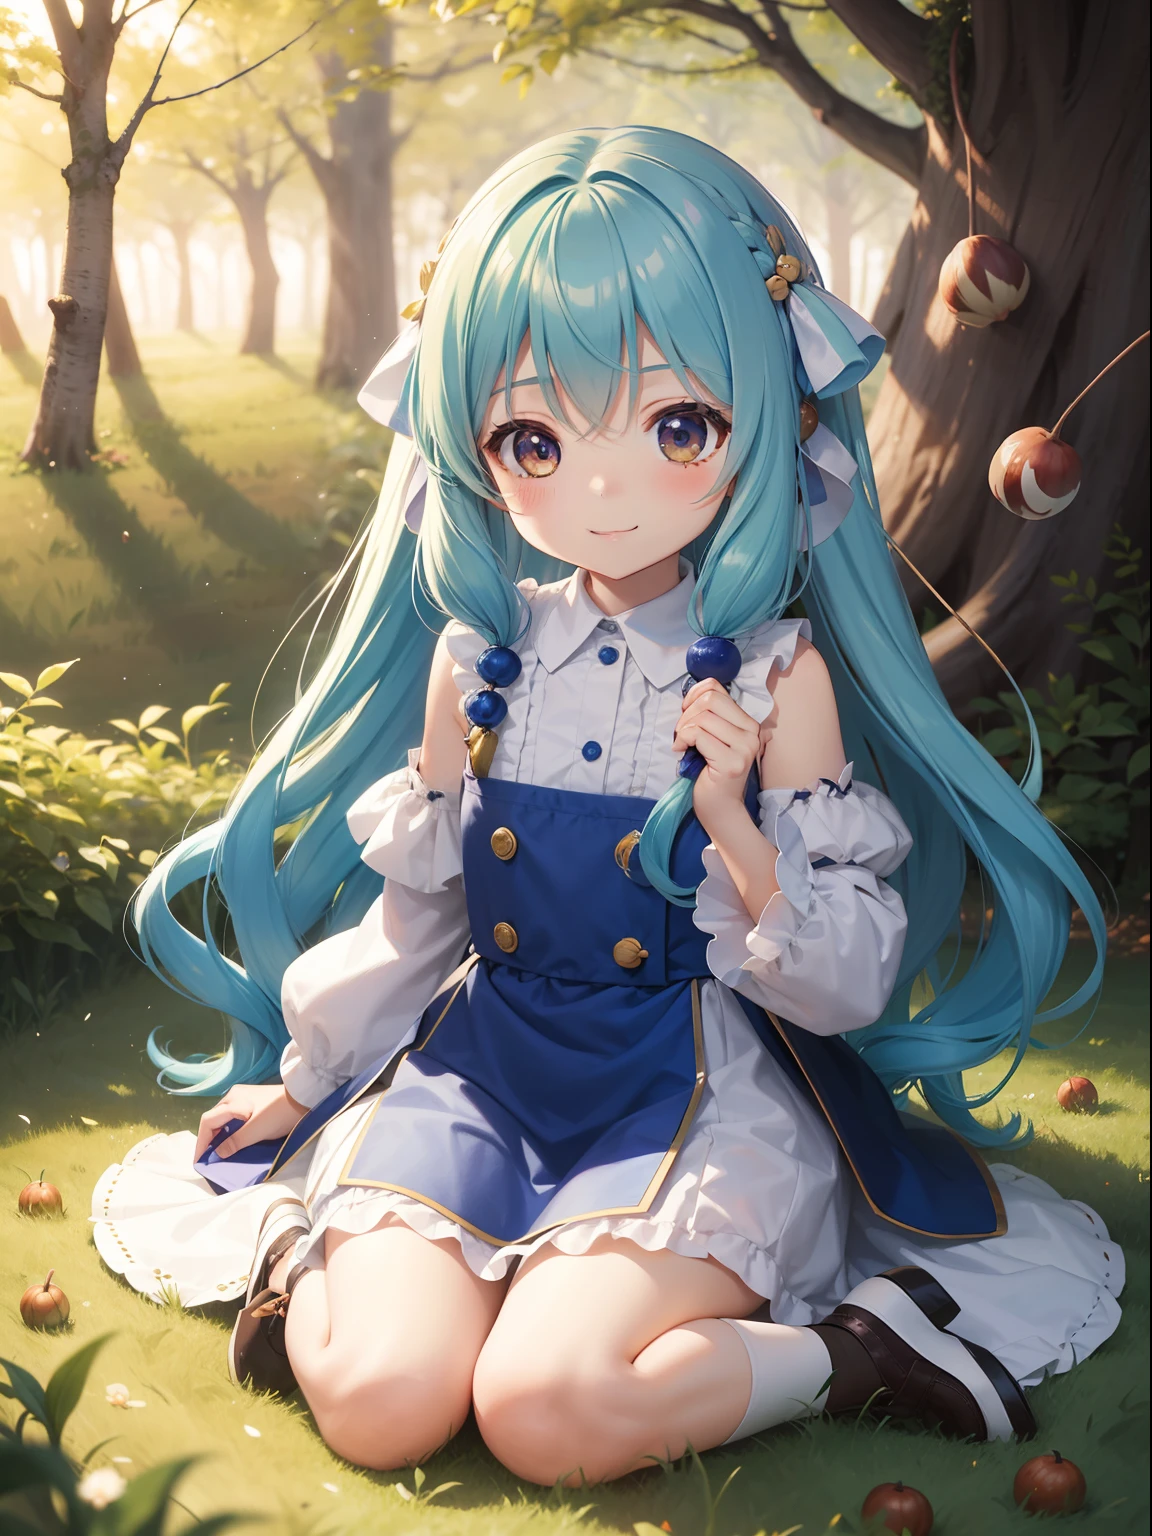 Chibichara　Picking chestnuts in a chestnut grove　long hair with blue hair((Chibi Chara))、A charming smile、Fluffy、girl with、Chibi Chara、Friends of the Forest、full body Esbian、Pastel colors hair、masutepiece、top-quality、